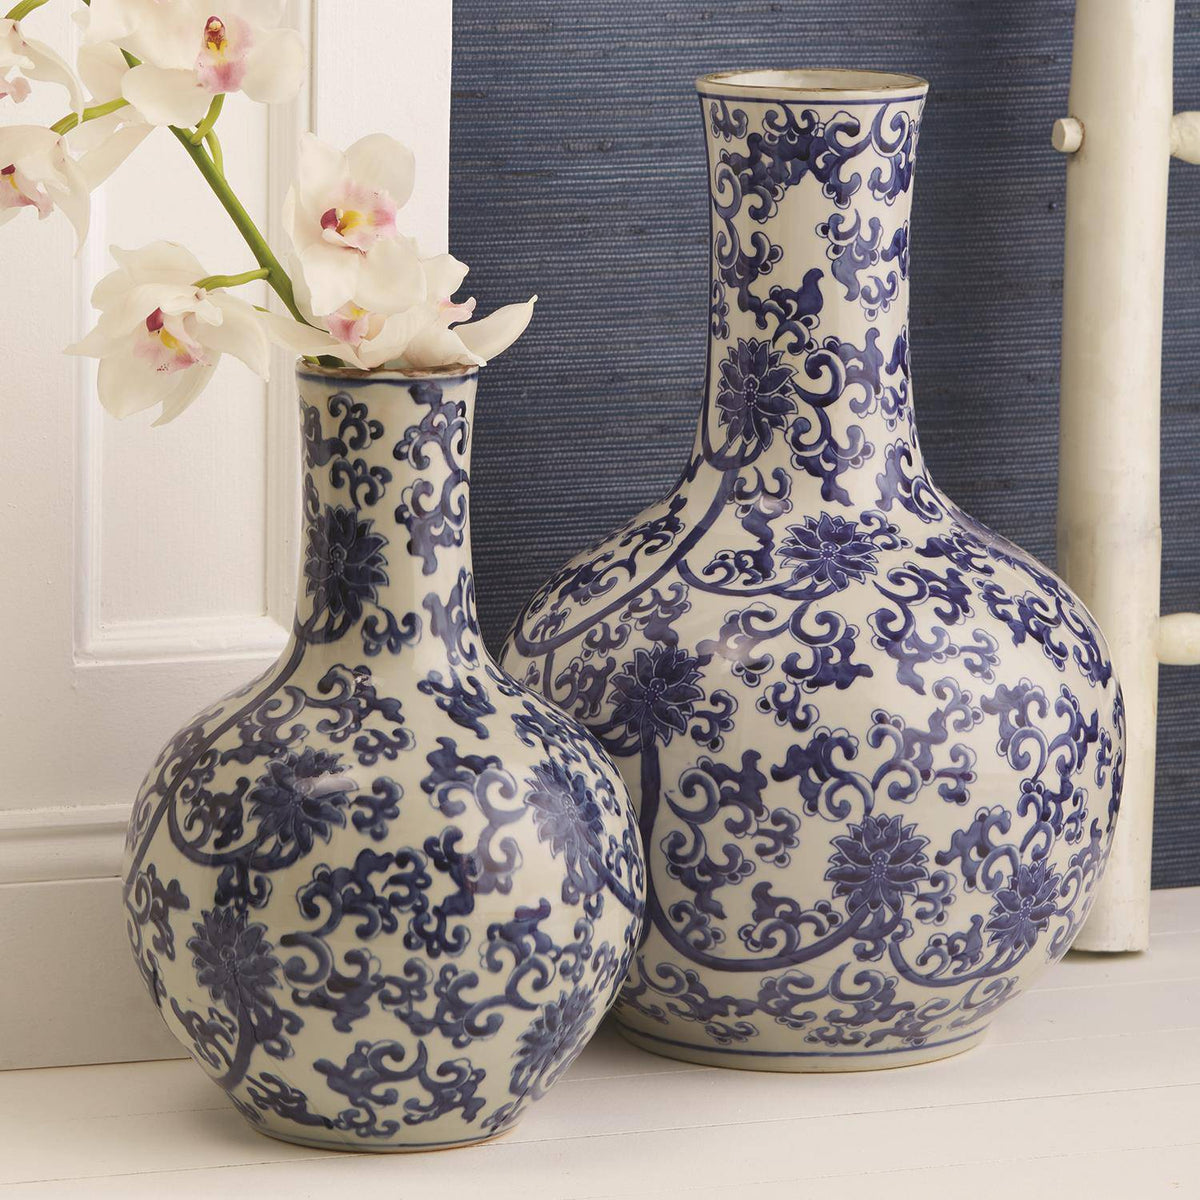 Blue and White Lotus Flower Vase - 2 sizes available - The Preppy Bunny